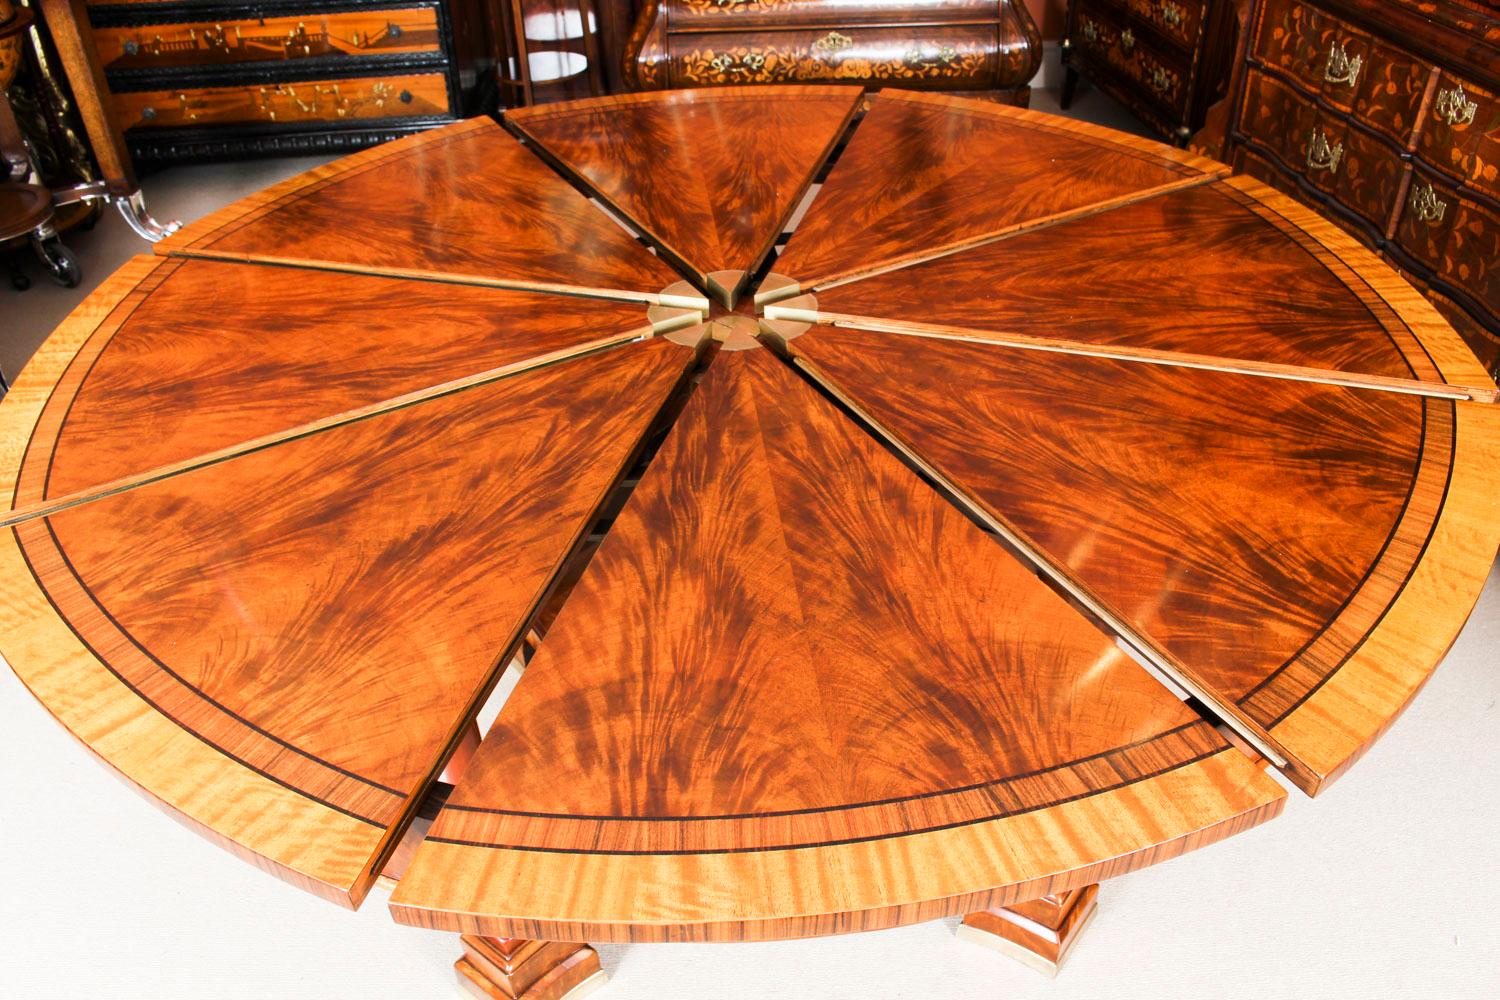 Flame Mahogany Jupe Dining Table Early 20th Century & 10 Antique Chairs 7